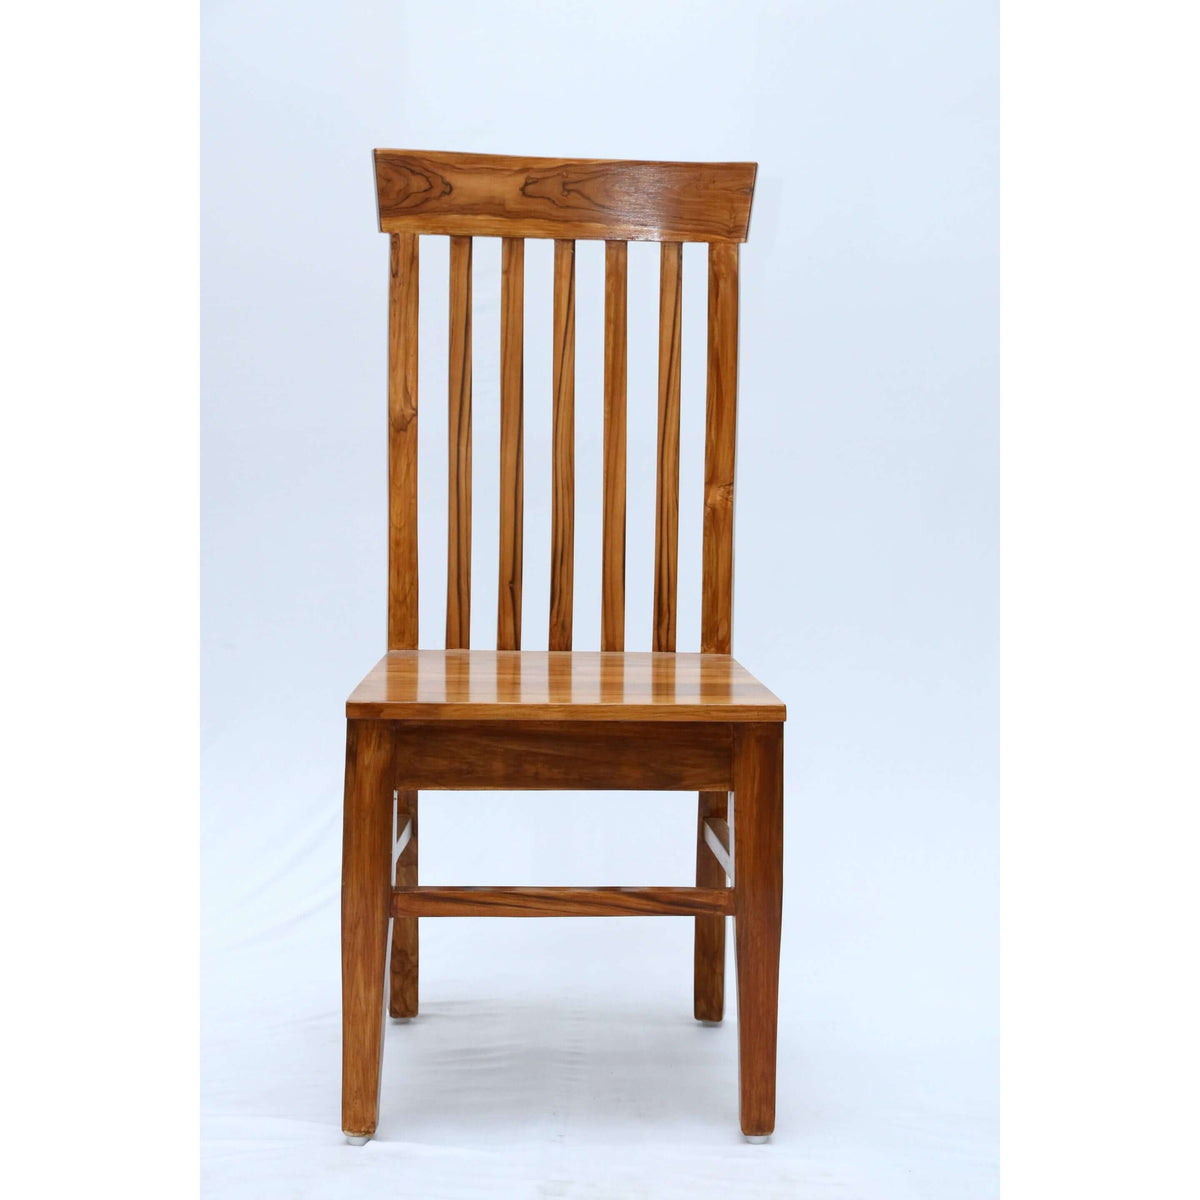 Teak wood dining chair with high backrest tch-2001